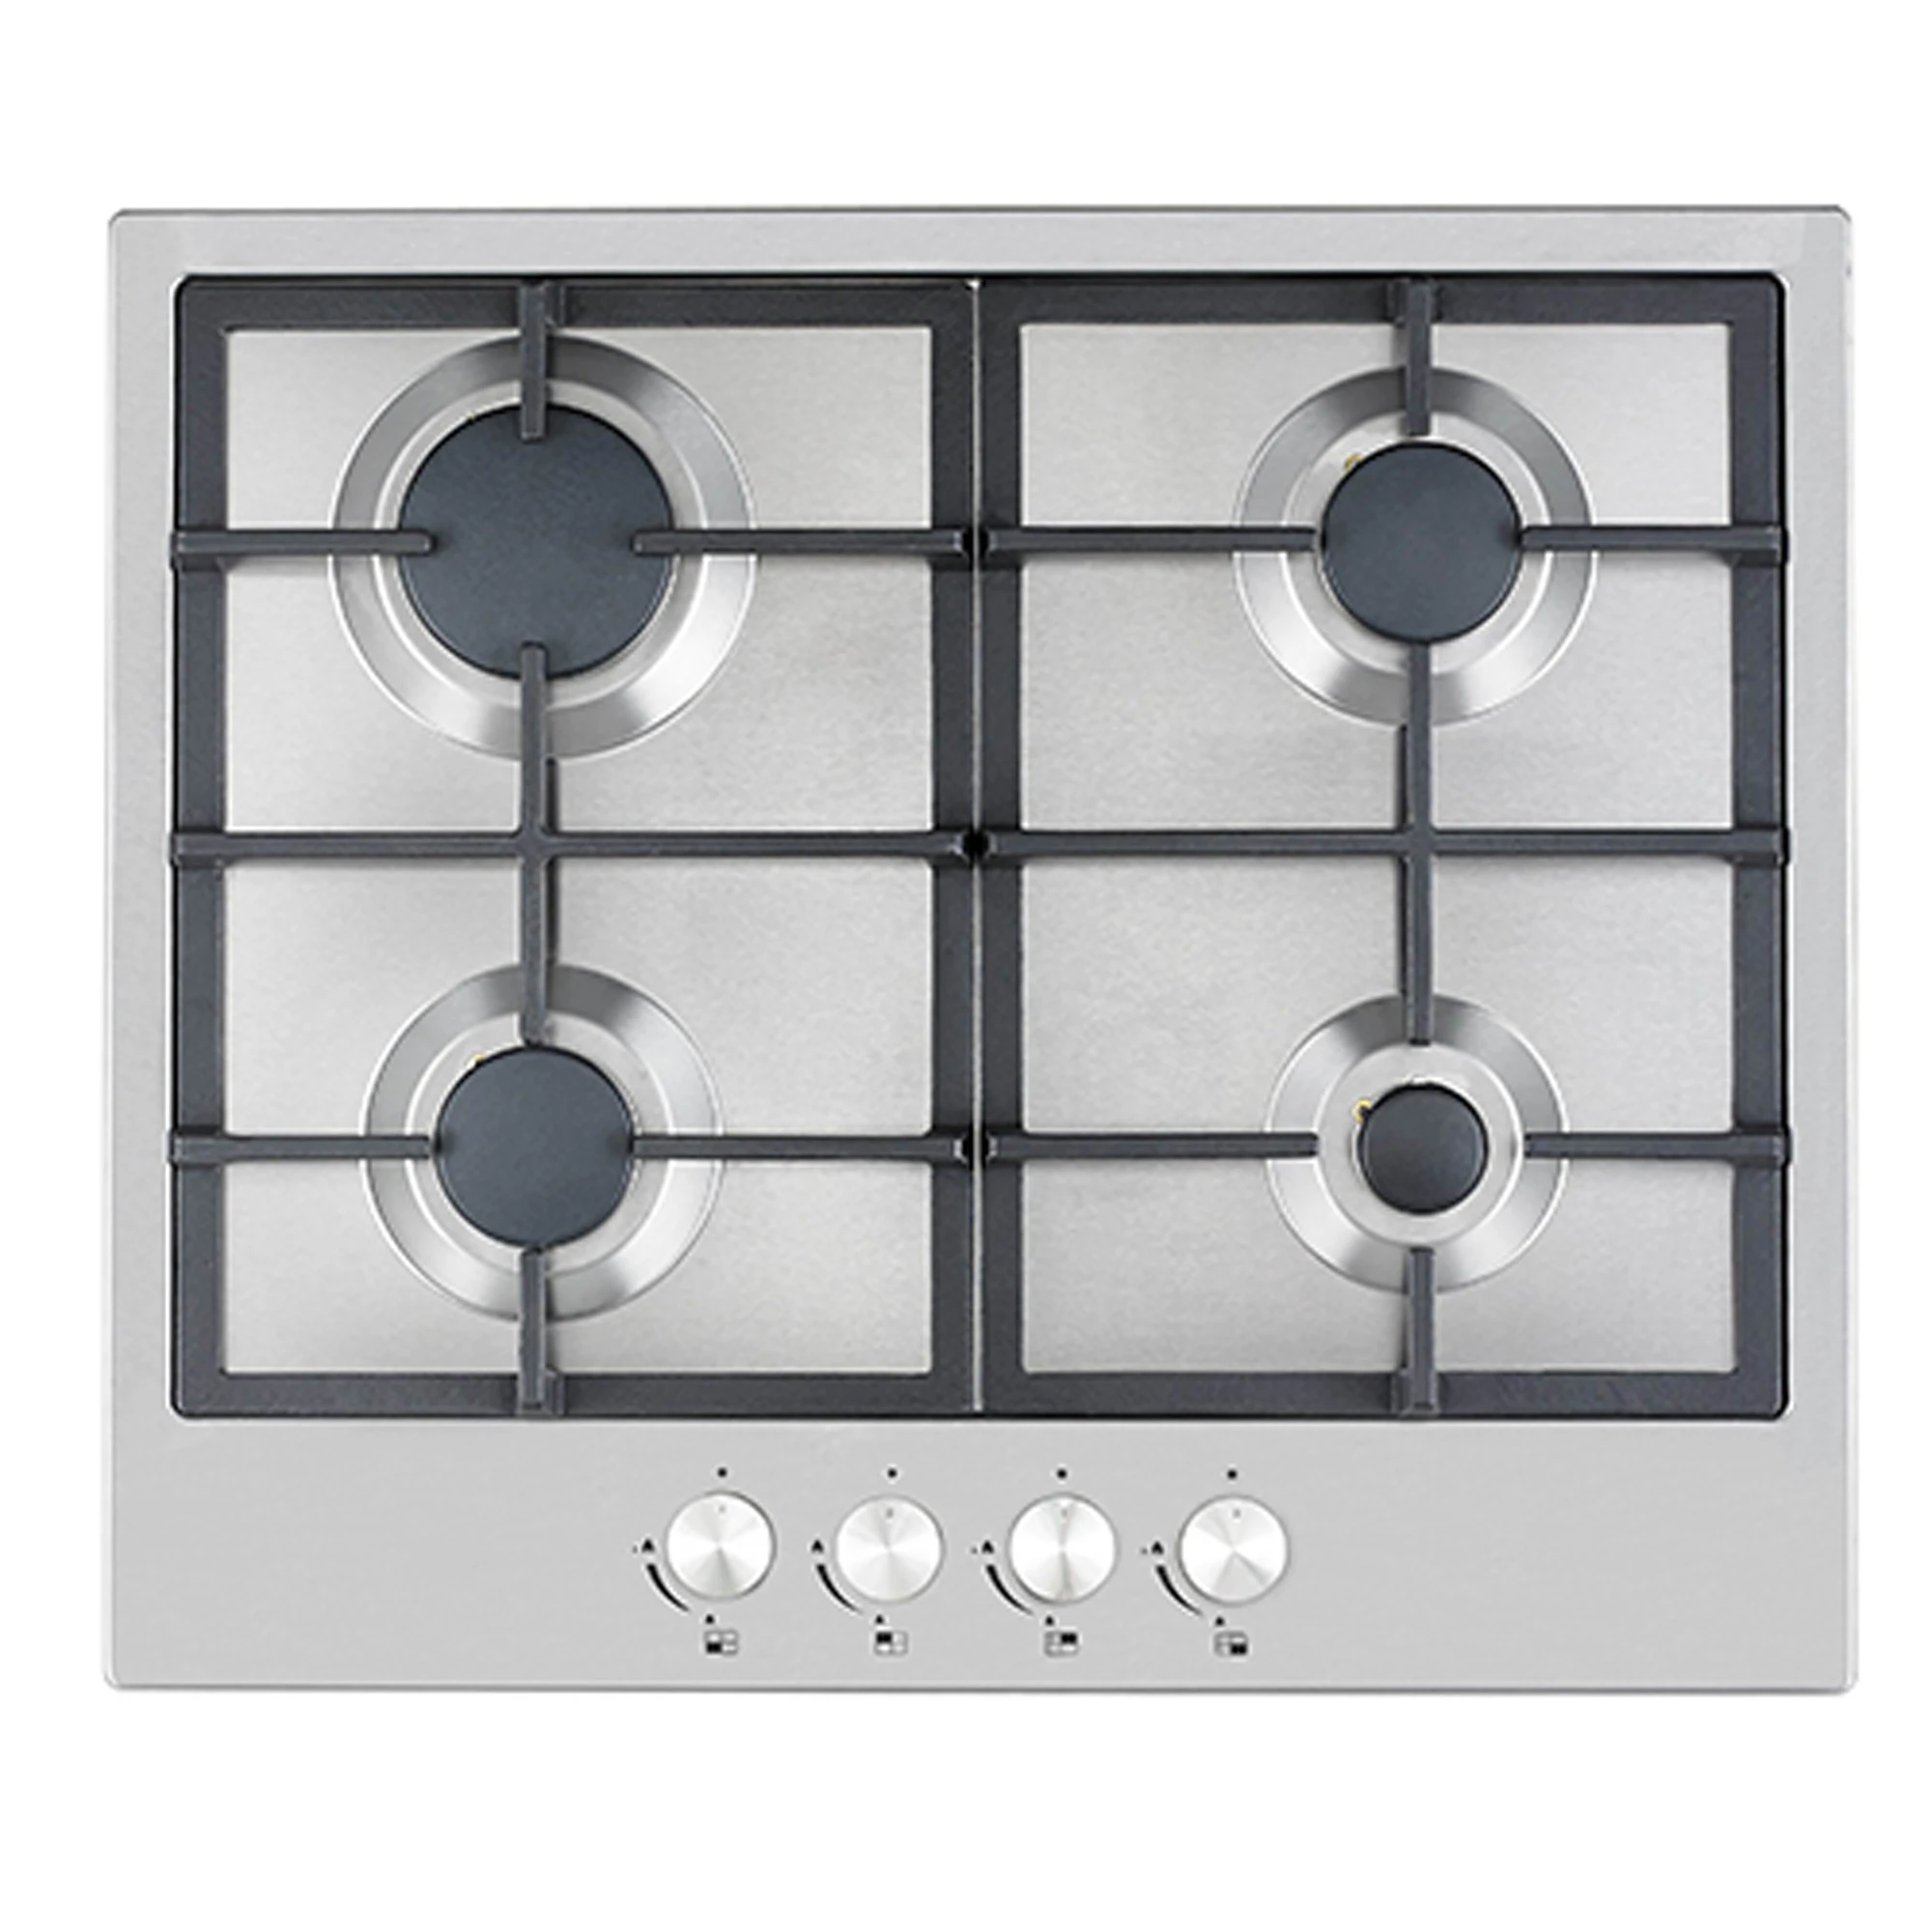 2021 Buildin hot selling gas stove cooktop 4  wok gas stove burner